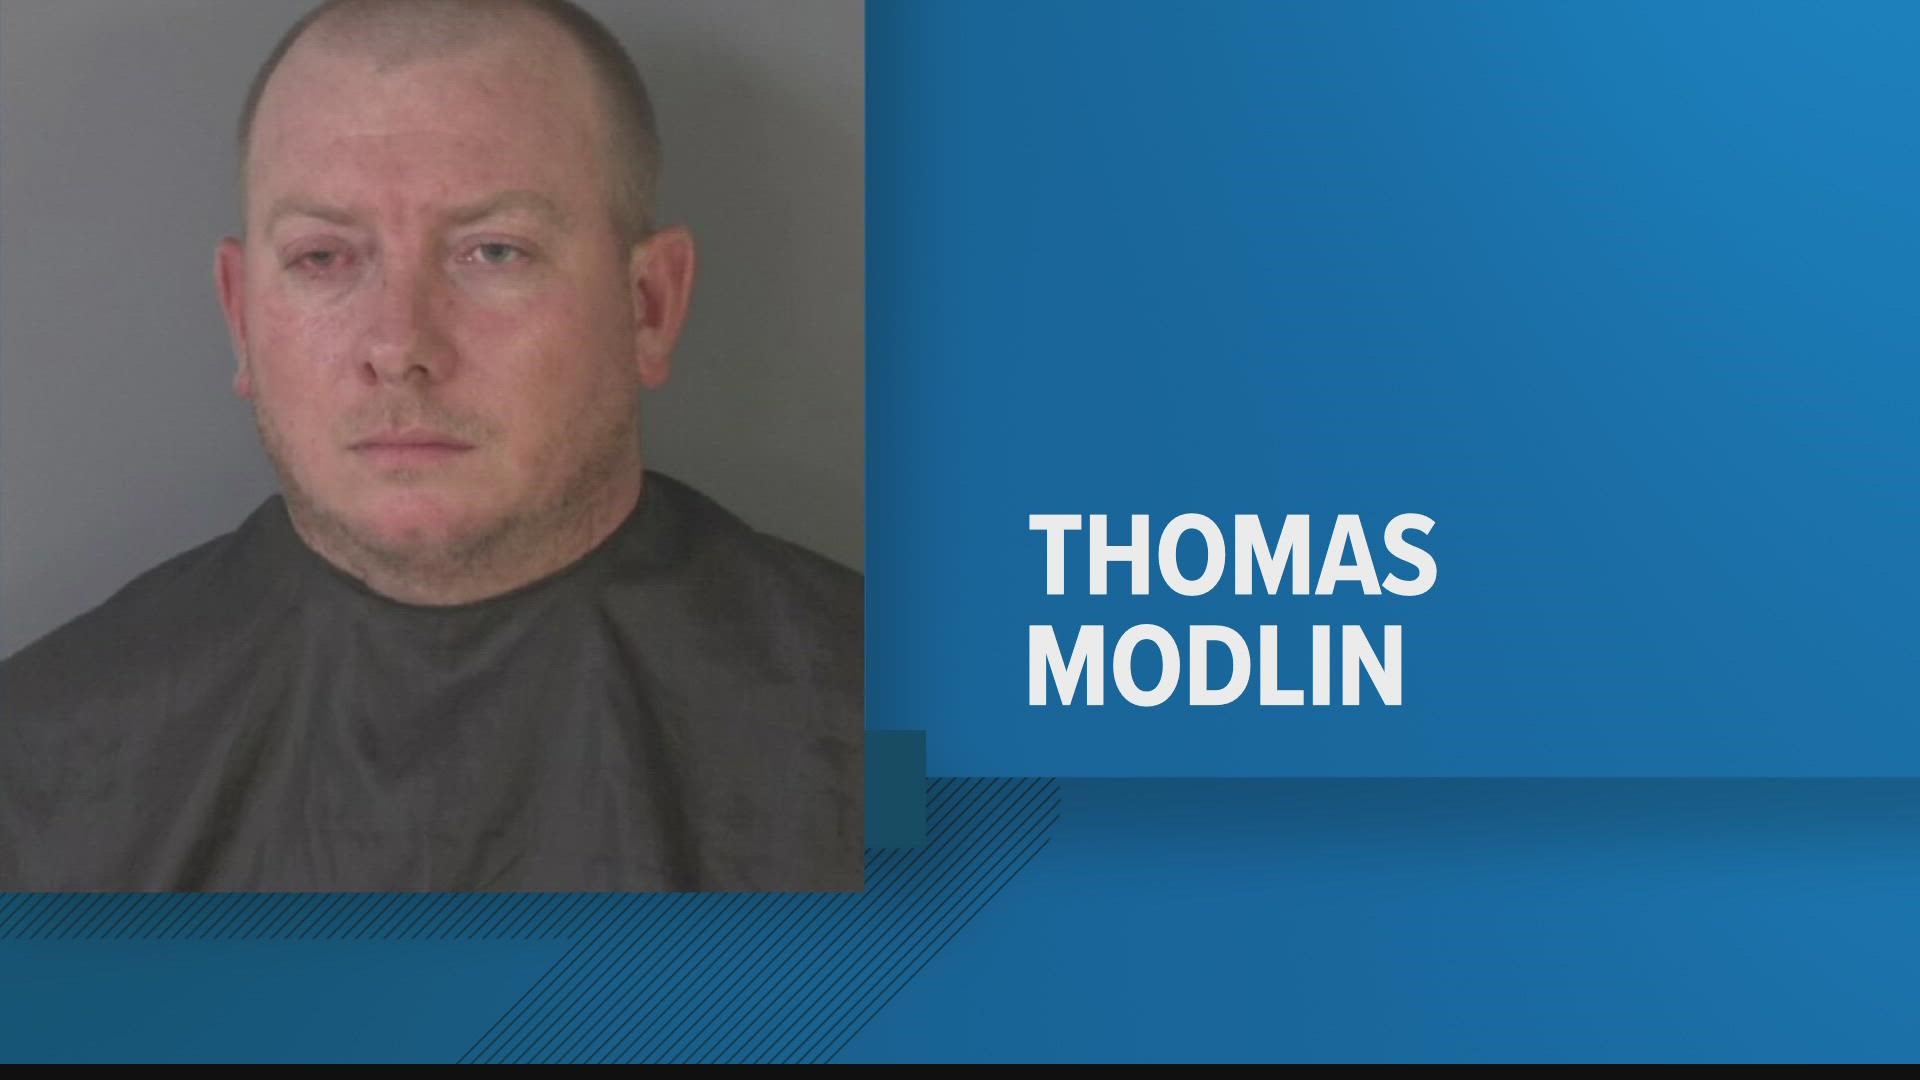 Thomas Modlin, 32, was charged with one count of second-degree murder and another count of attempted murder, according to jail records.